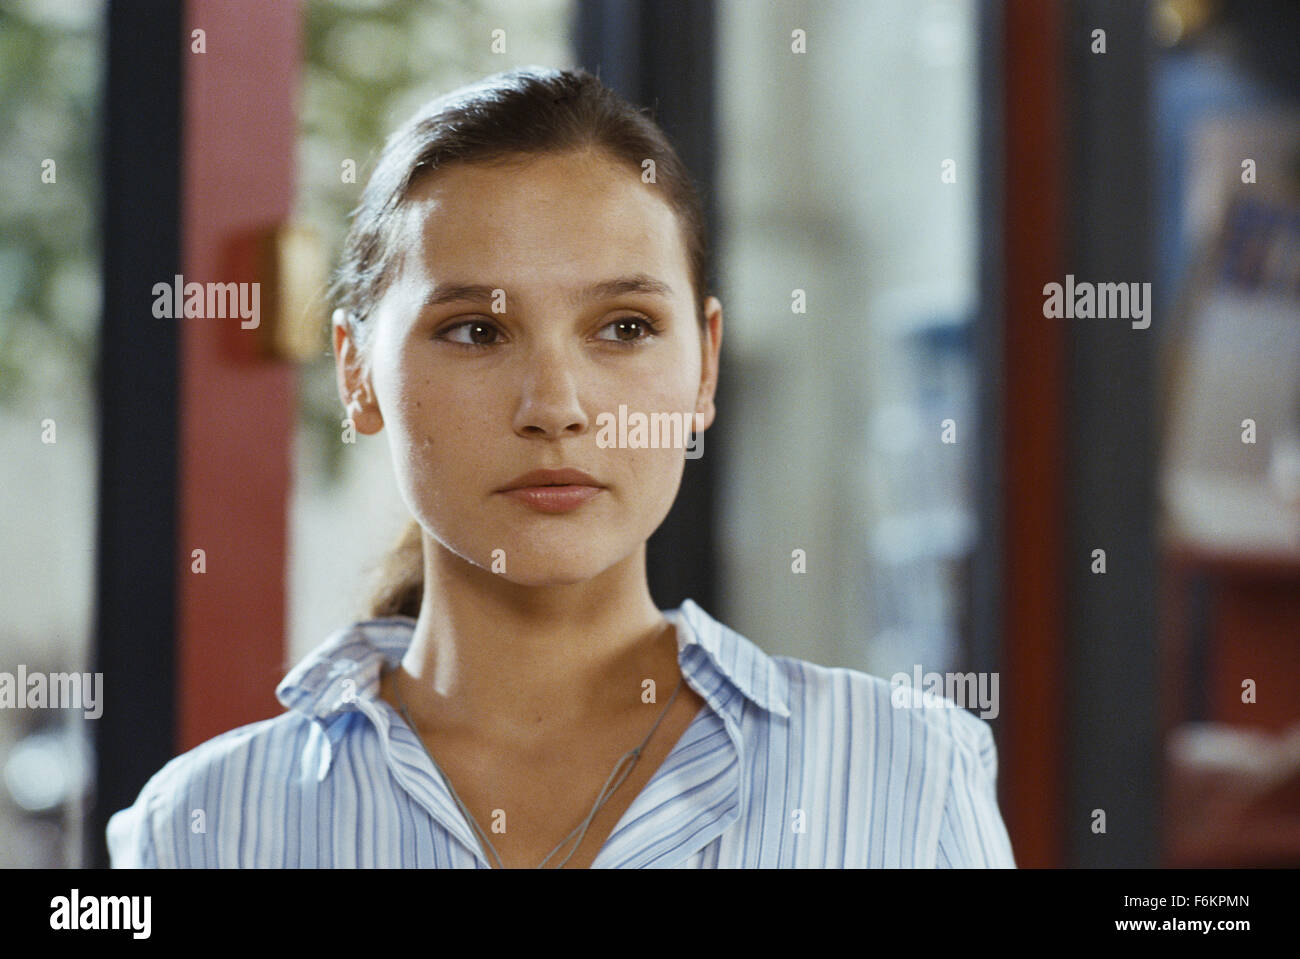 RELEASE DATE: April 20, 2007. MOVIE TITLE: The Valet. STUDIO: Sony Pictures. PLOT: A restaurant car service valet gets caught up in a billionaire industrialist's sneaky infidelities. PICTURED: VIRGINIE LEDOYEN as Emilie. Stock Photo